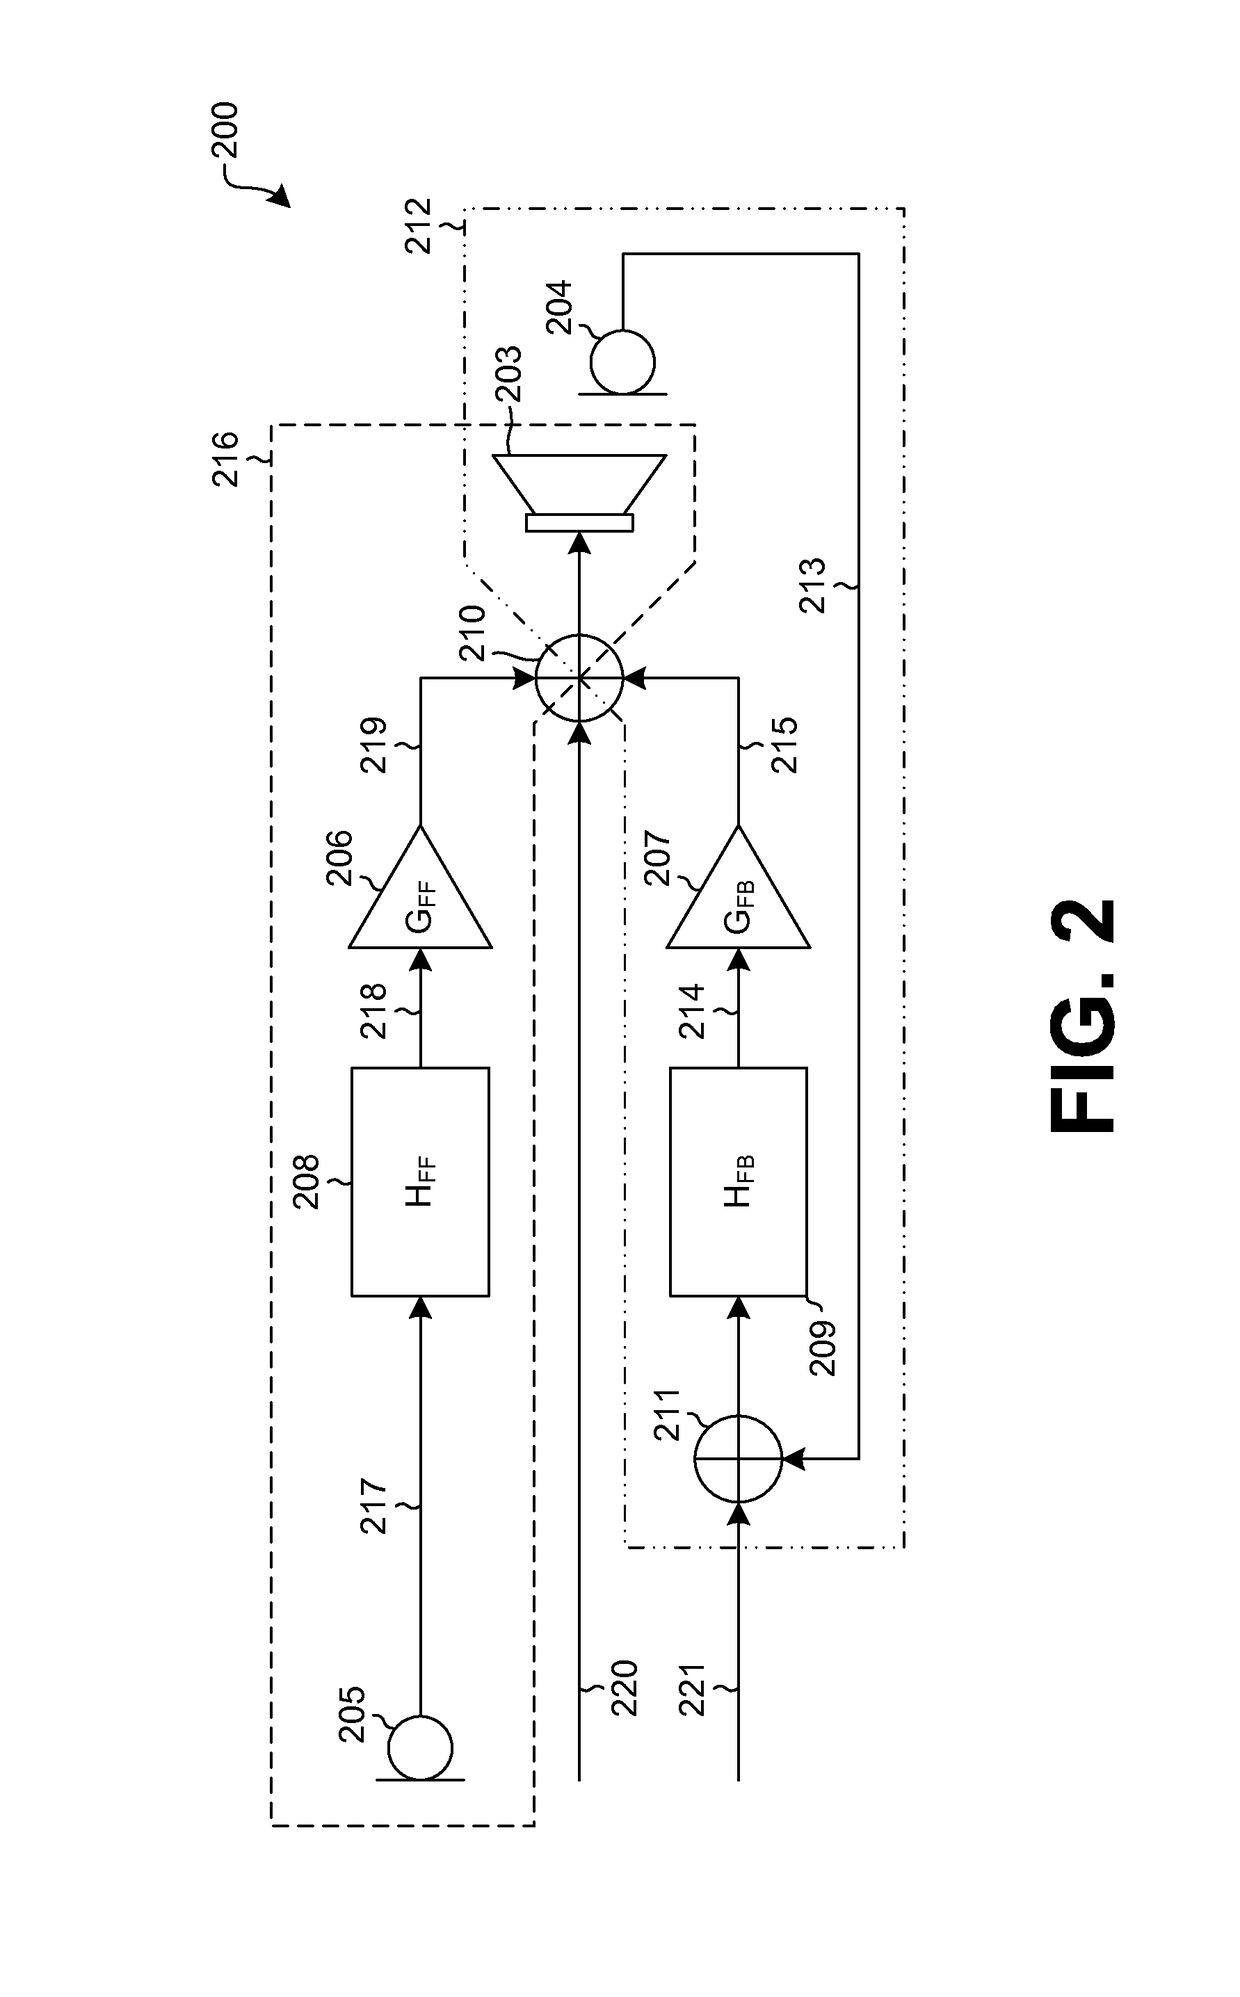 Calibration and stabilization of an active notice cancelation system